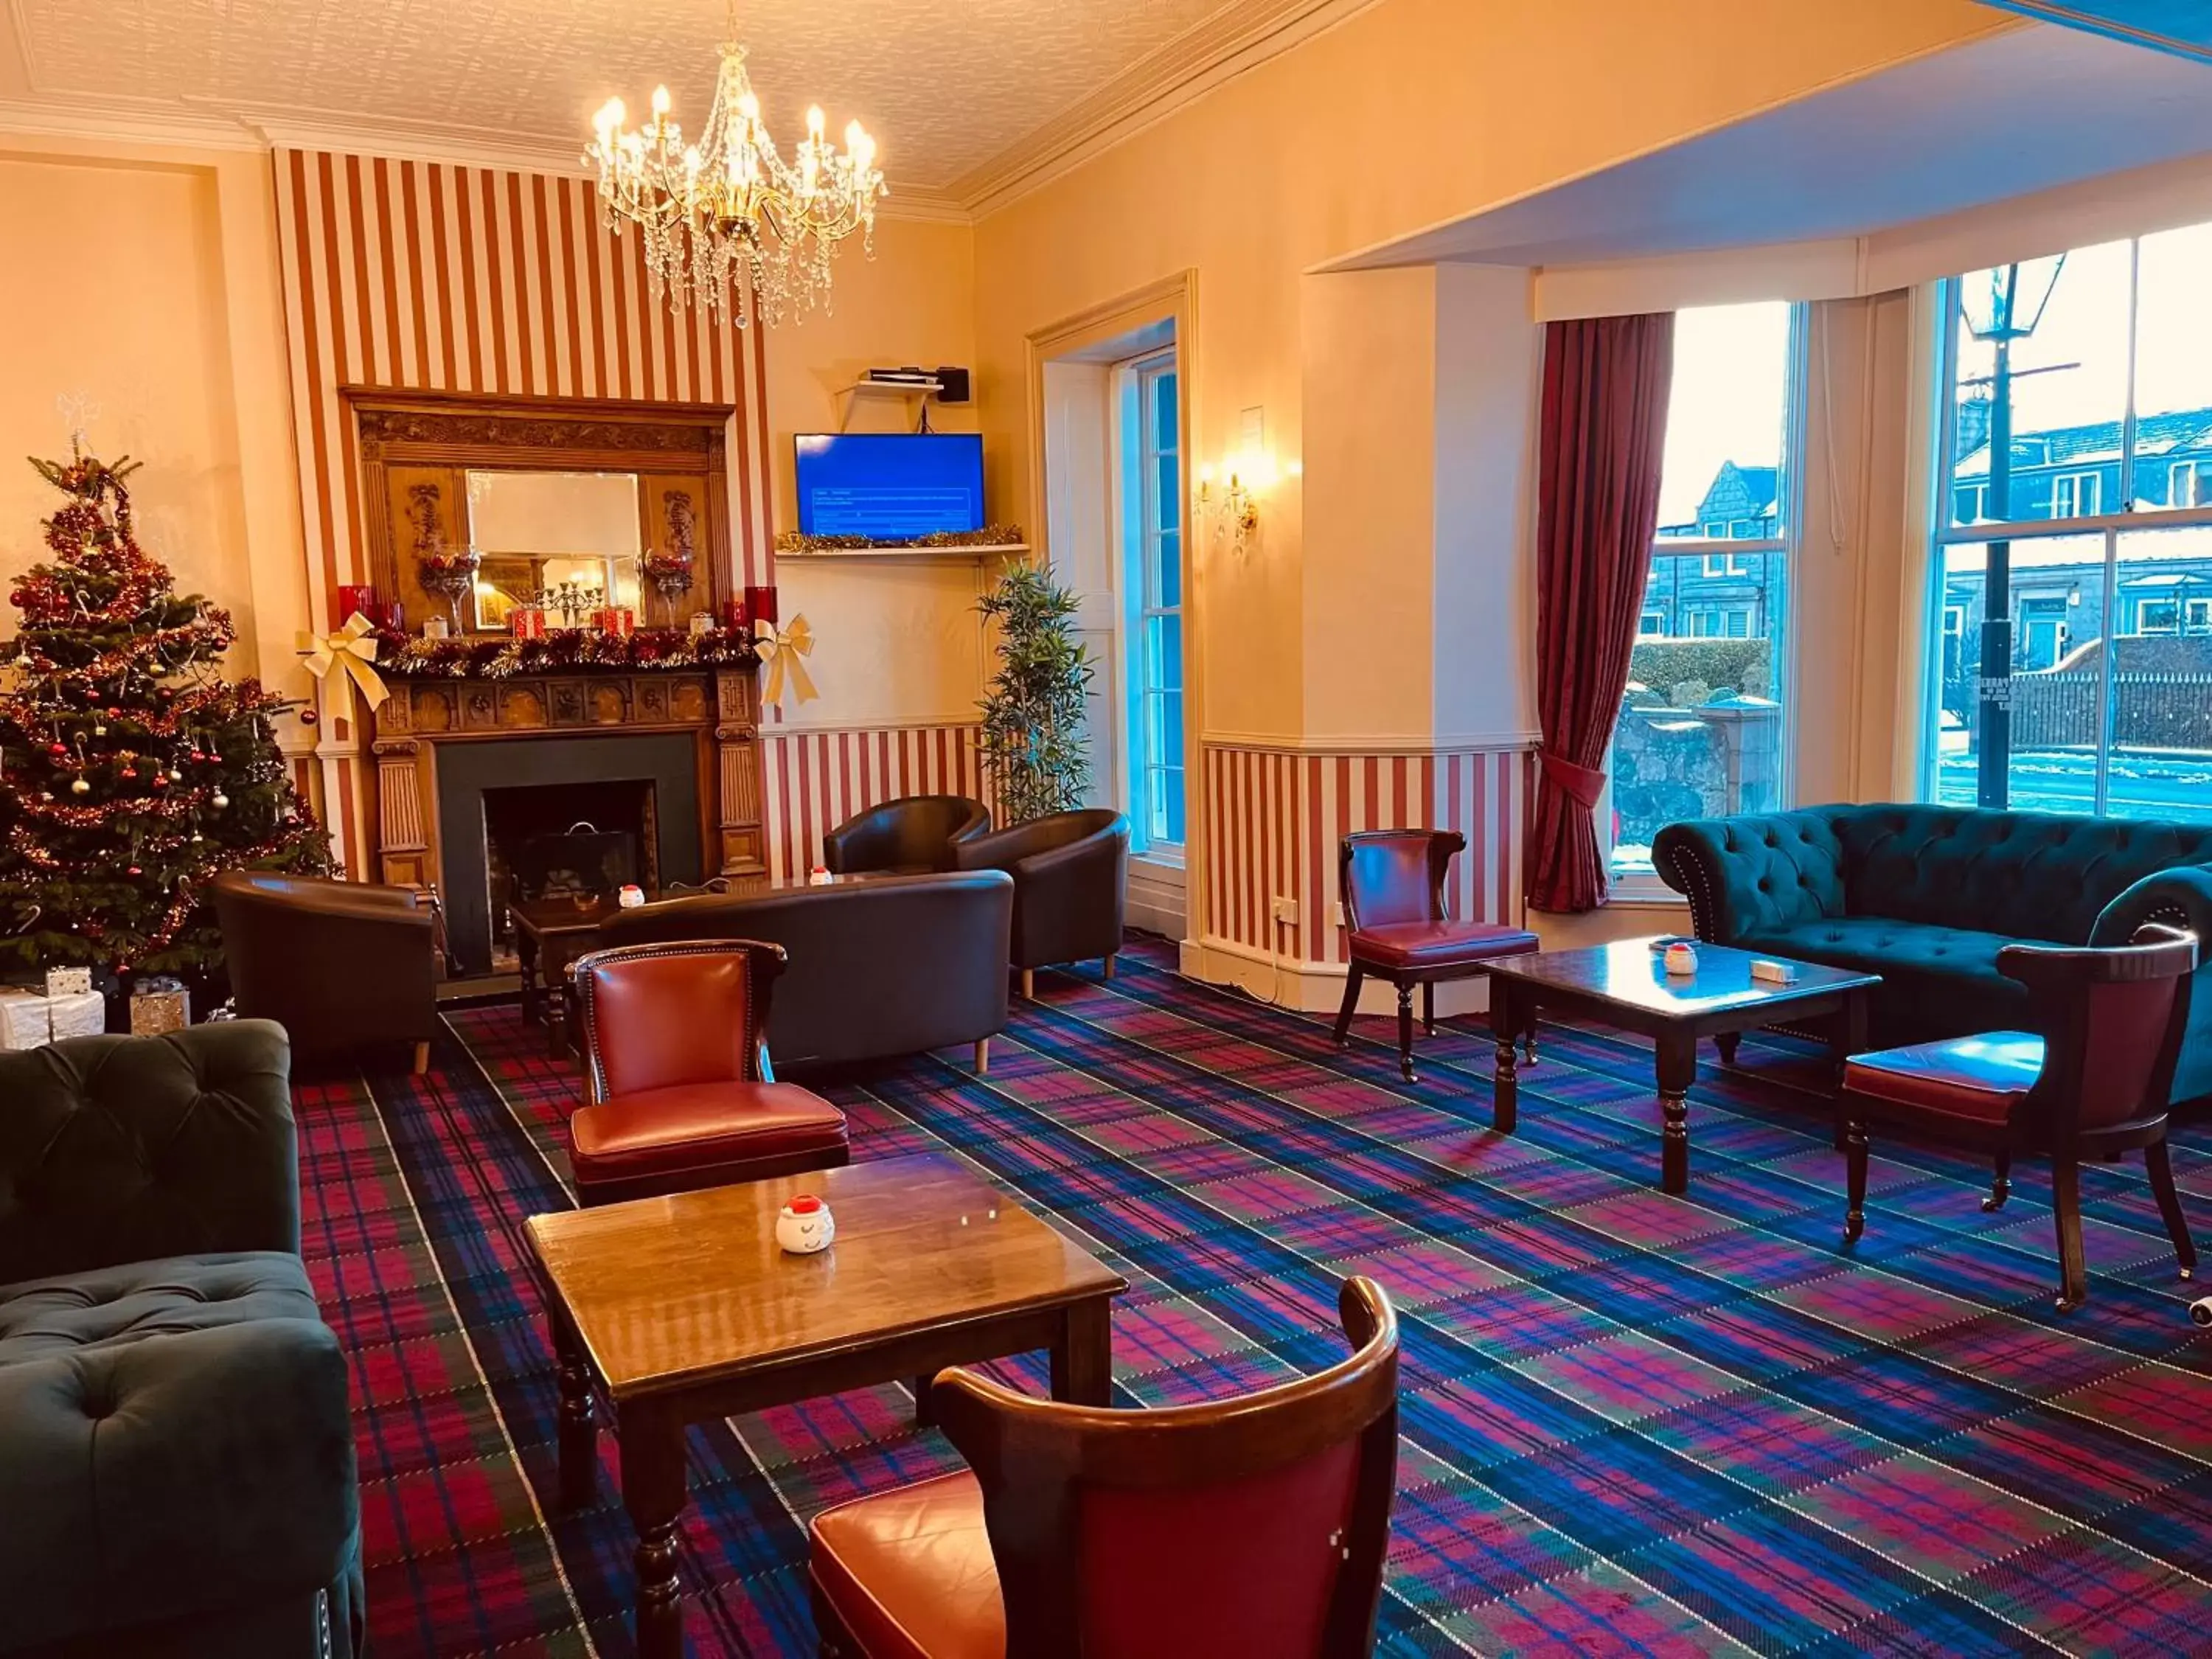 Lounge or bar, Seating Area in The Elgin Kintore Arms, Inverurie - Heritage Hotel Since 1855